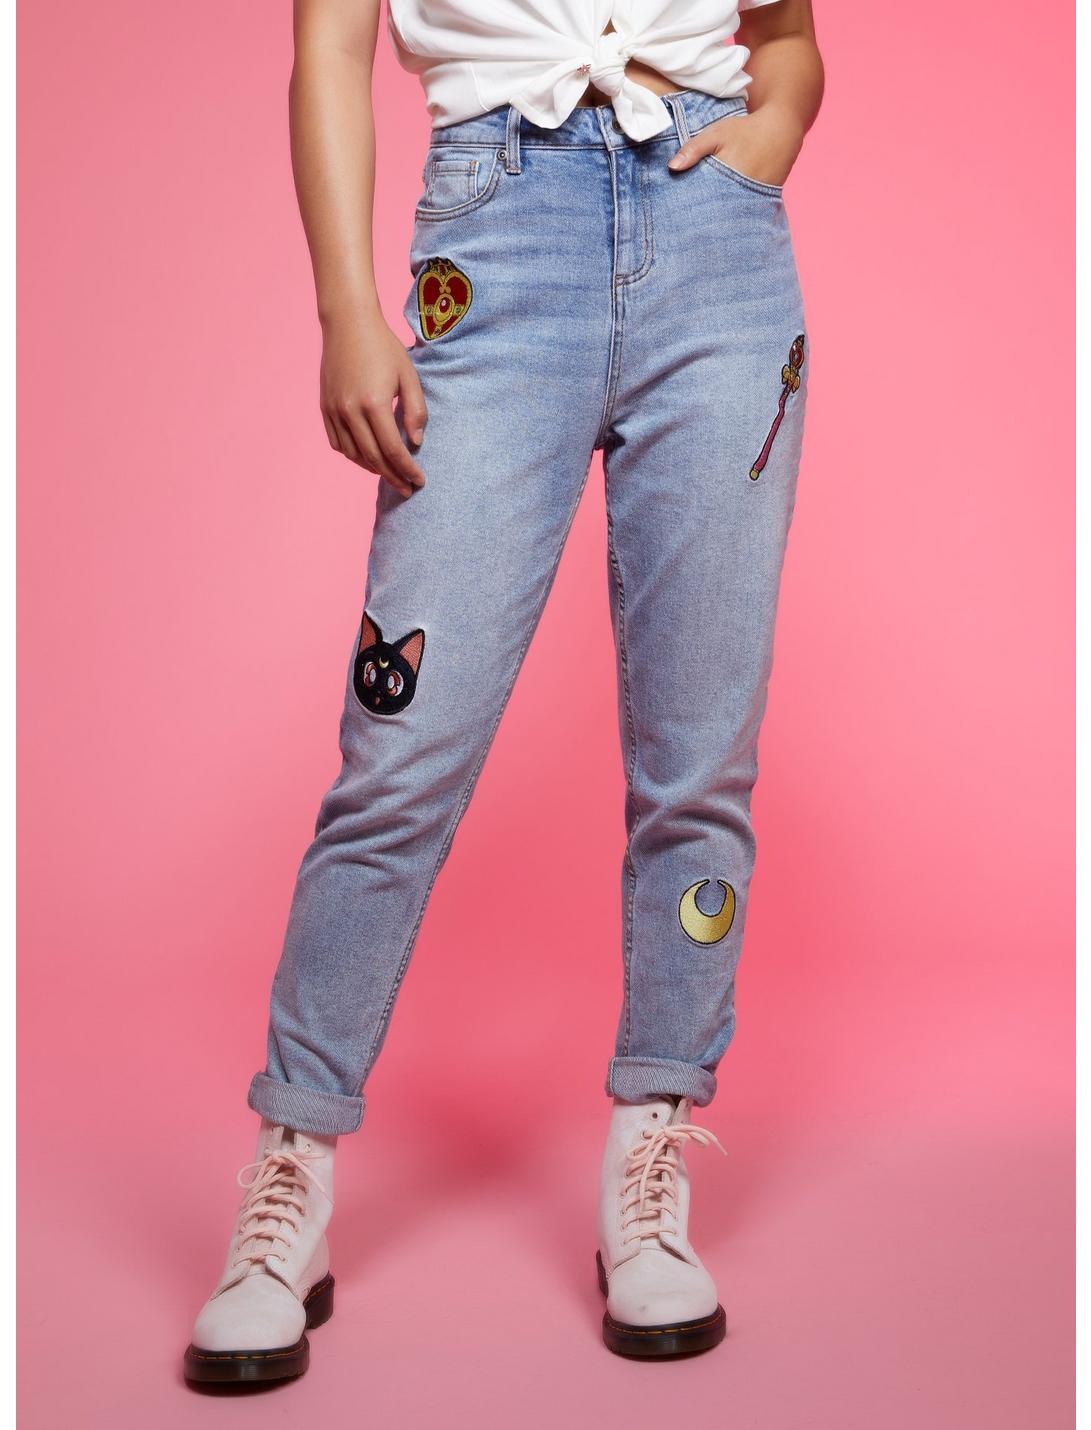 Sailor Moon Icons Embroidered Mom Jeans, MULTI, hi-res